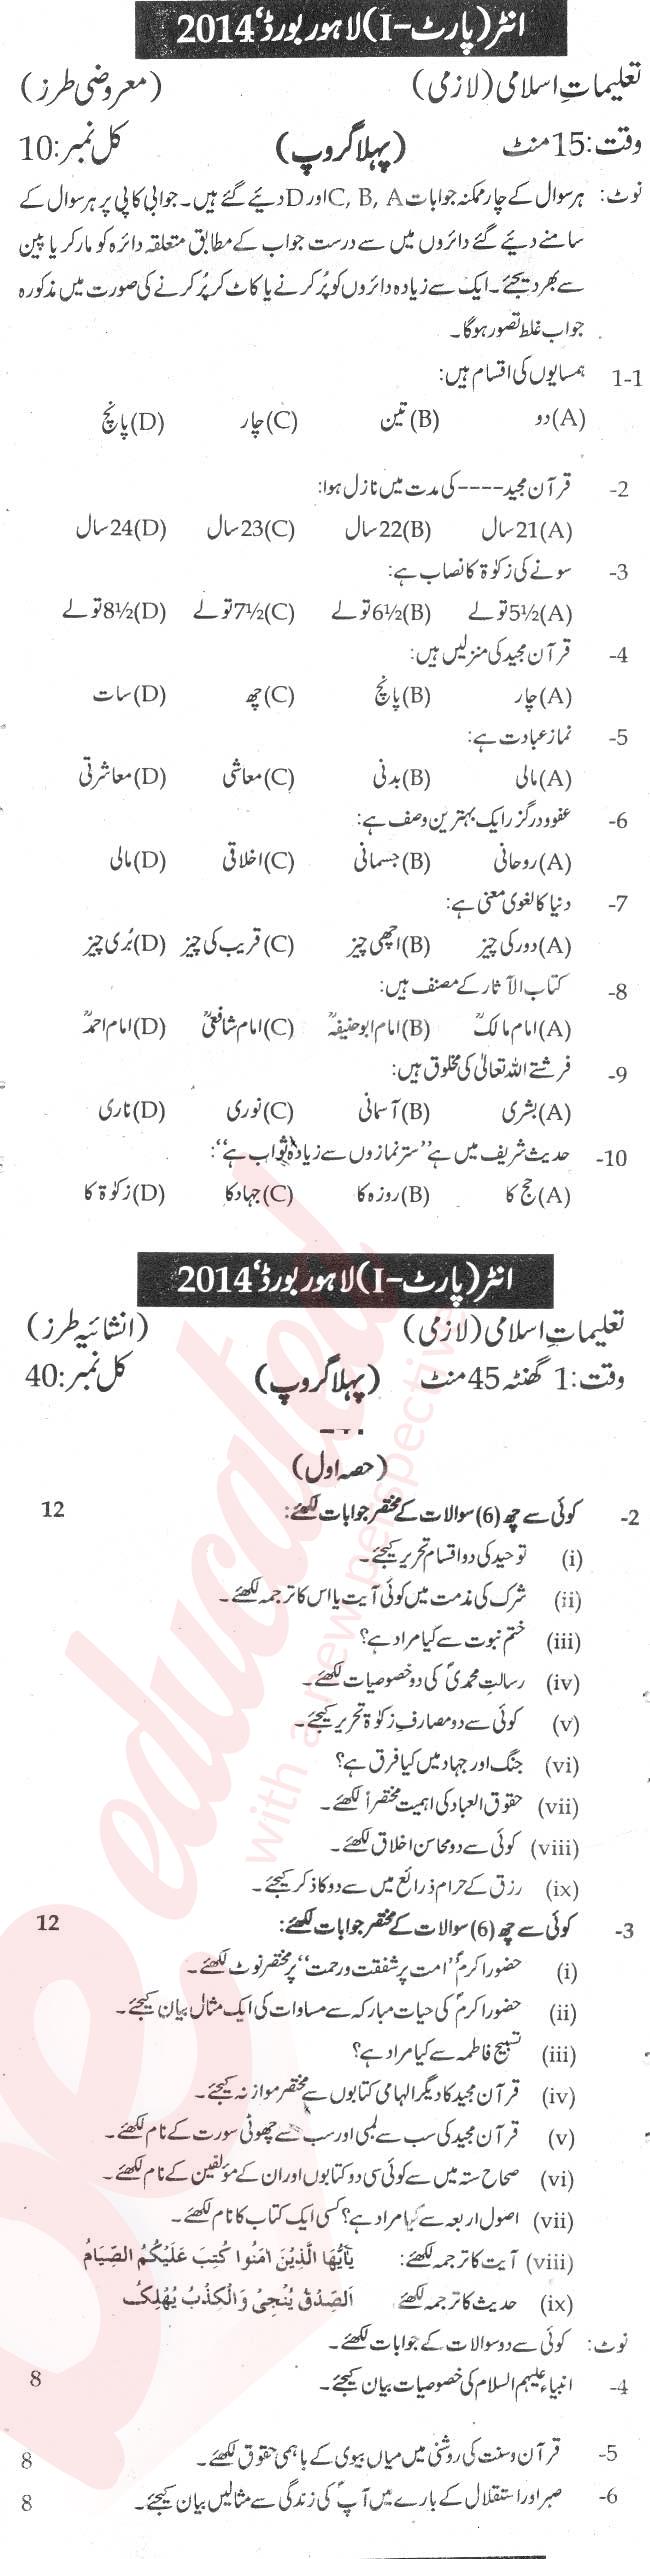 Islamic Studies 11th class Past Paper Group 1 BISE Lahore 2014